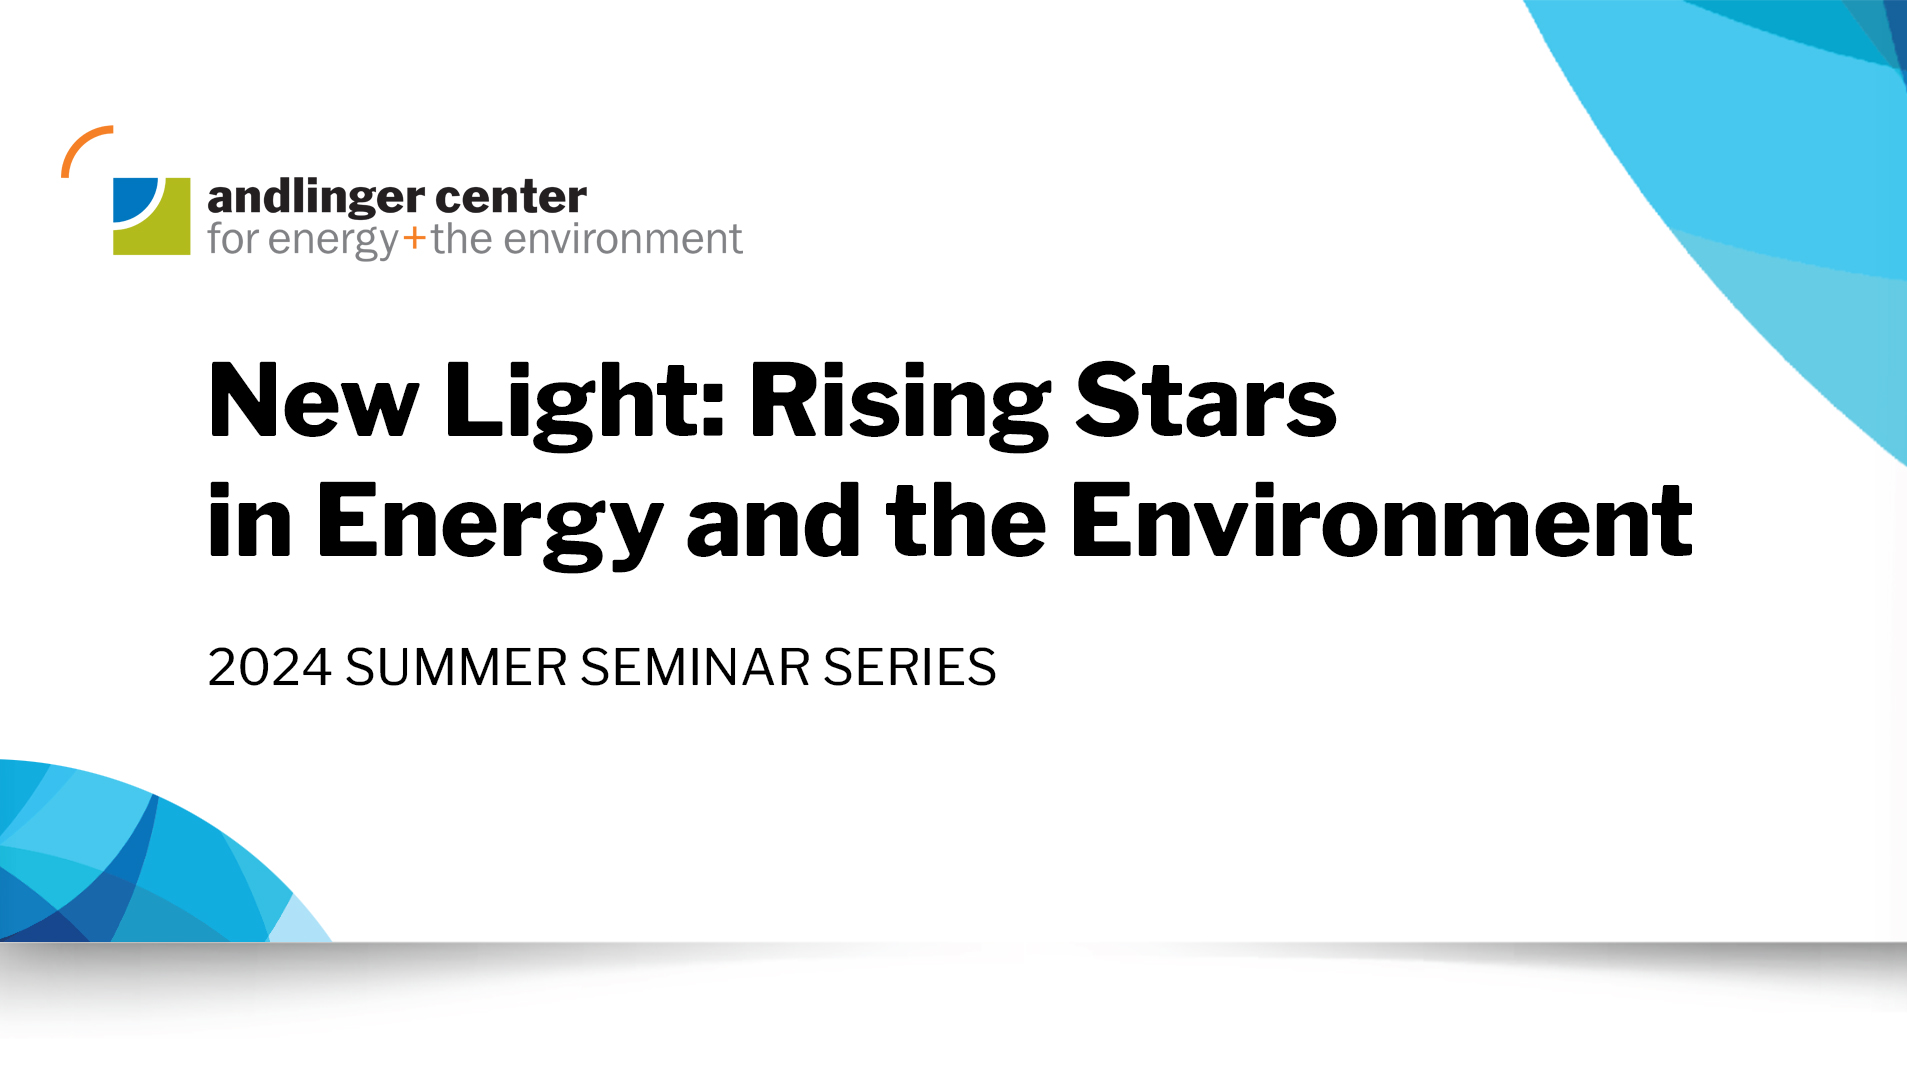 This series features the Andlinger Center’s Distinguished Postdoctoral Fellows and early career researchers. There will be three sessions featuring two researchers each: June 24, July 10, and July 16th.